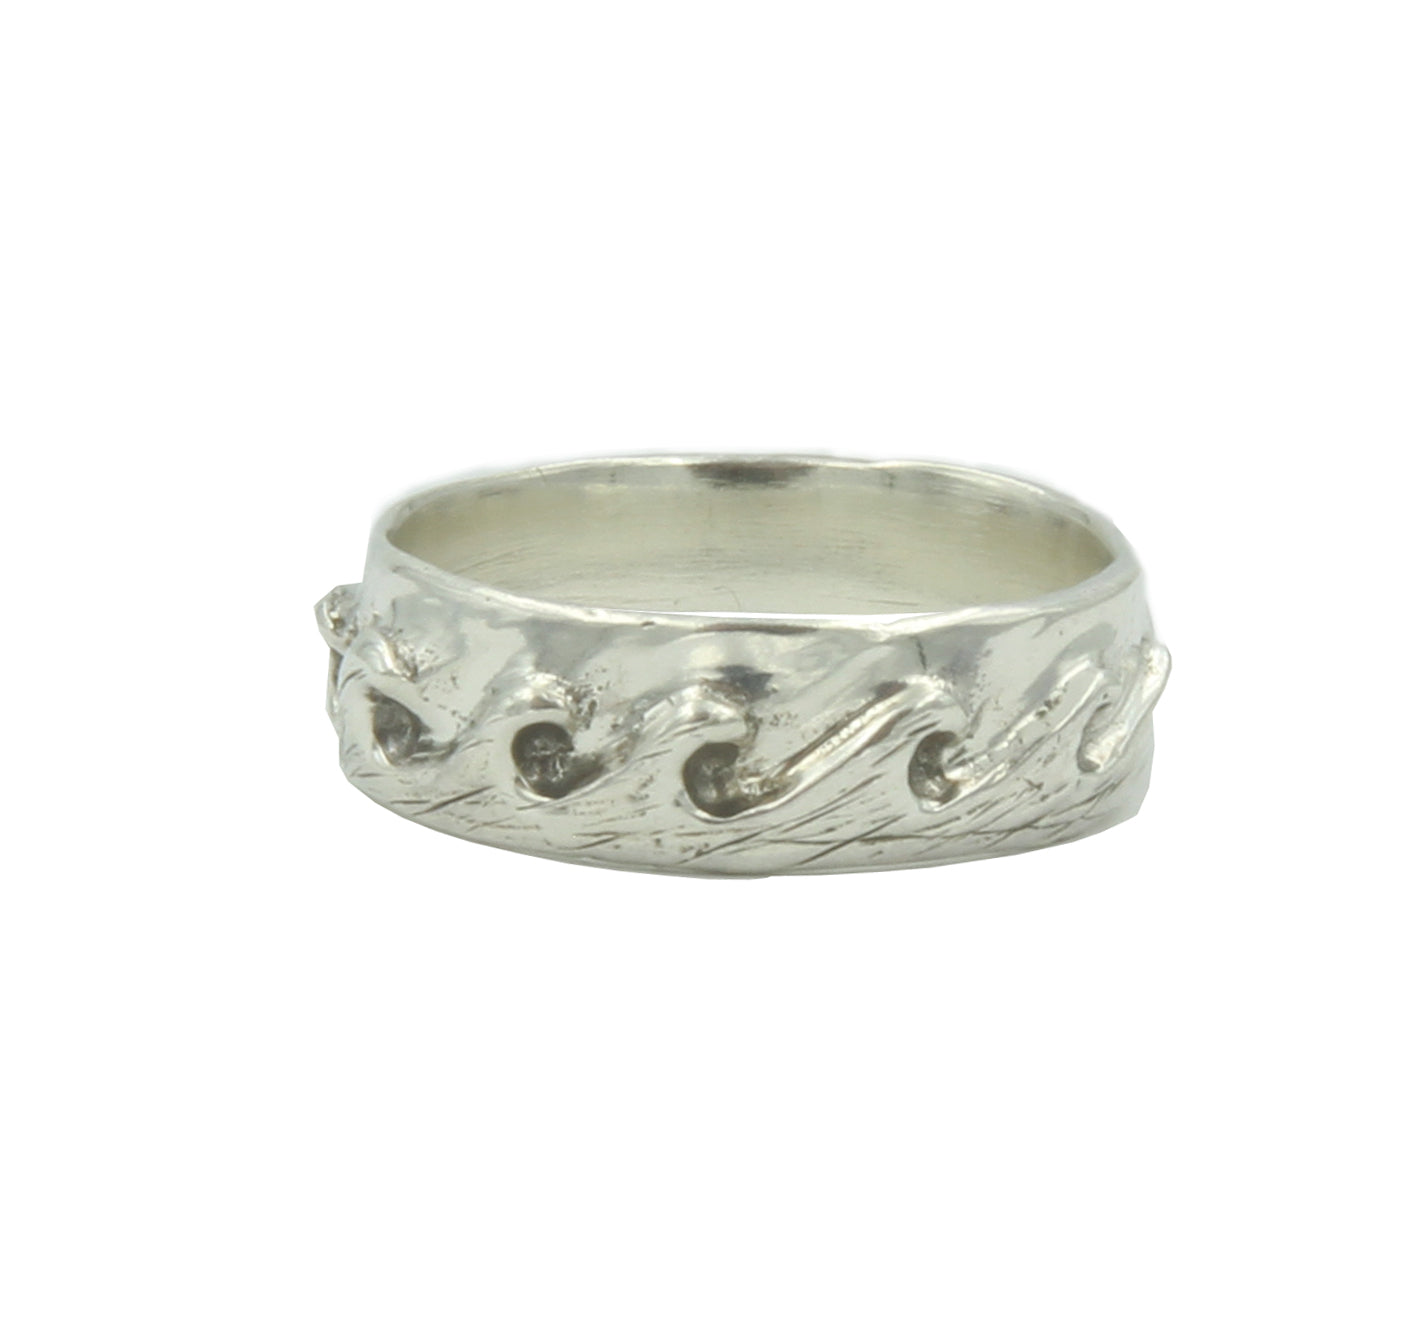 Rising Tide Band in Silver